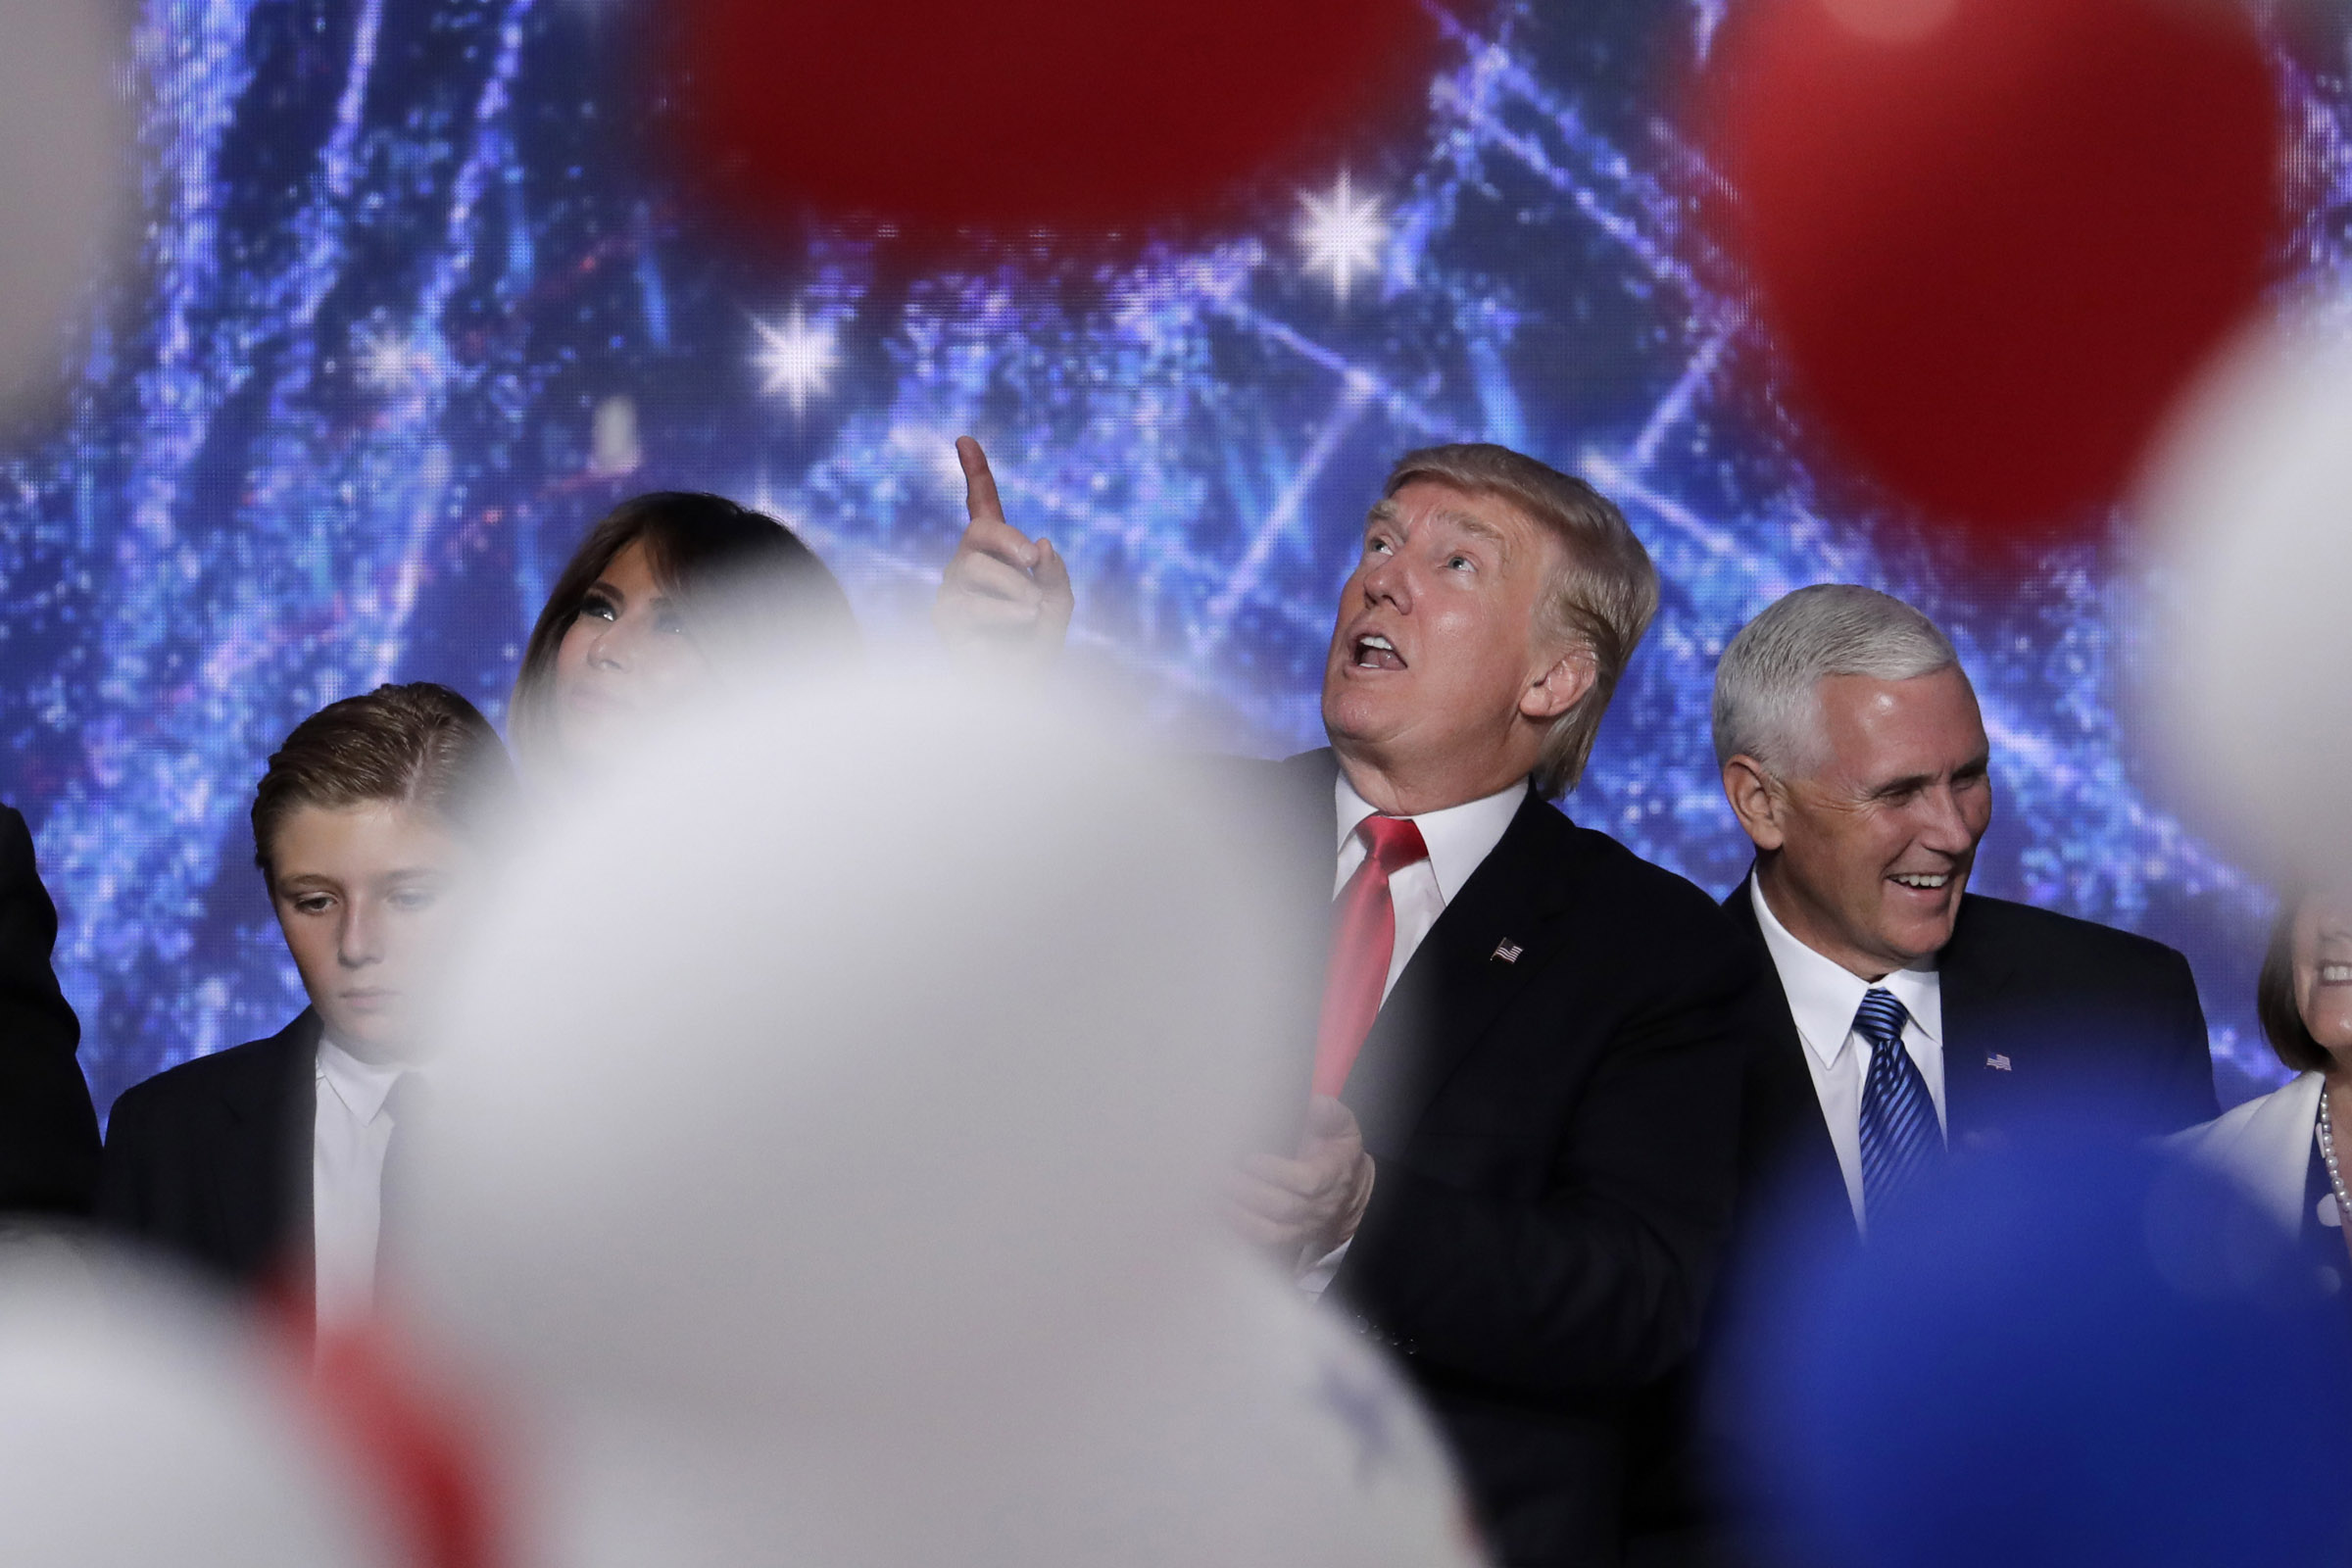 GALLERY: Republican National Convention – Day Four